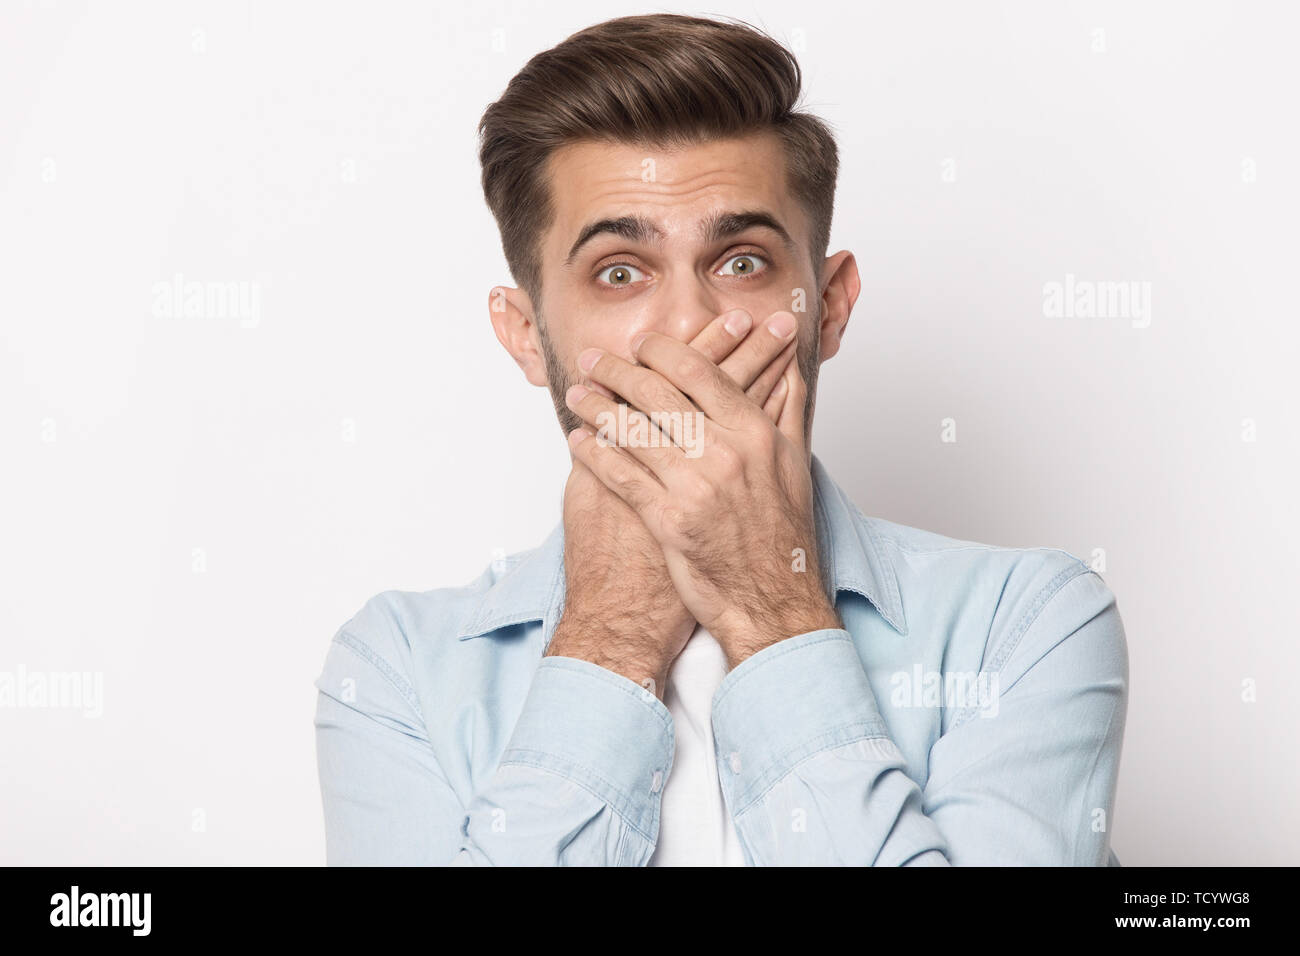 Horrified man covering mouth with hands looking at camera Stock Photo